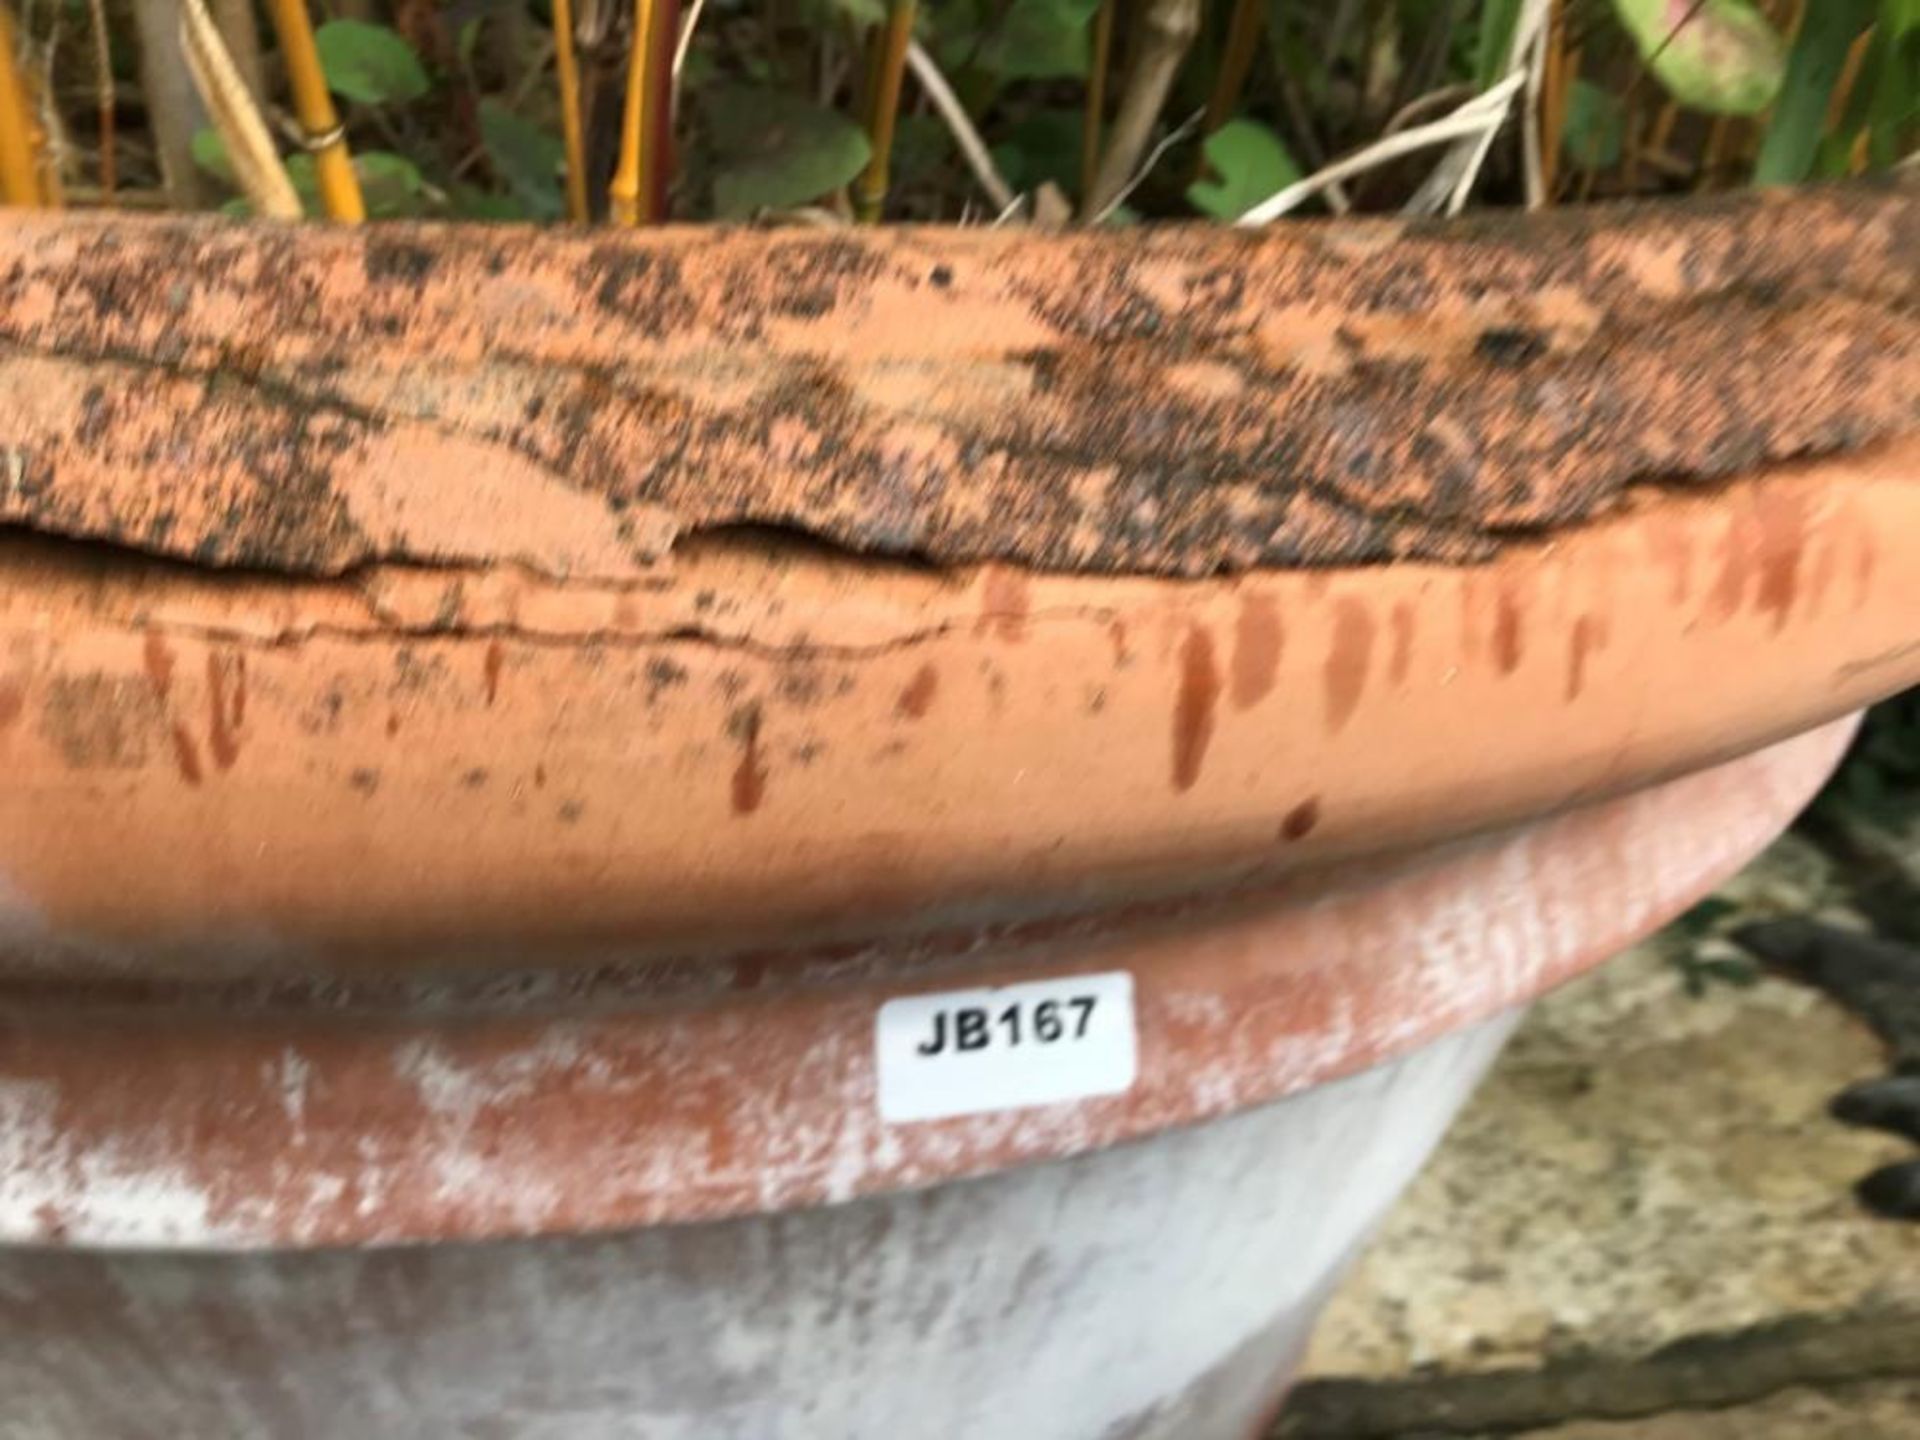 1 x Gigantic Ceramic Planter With A Diameter Of 115cm And A Height Of 75cm! - Ref: JB167 - Pre-Owned - Image 5 of 5